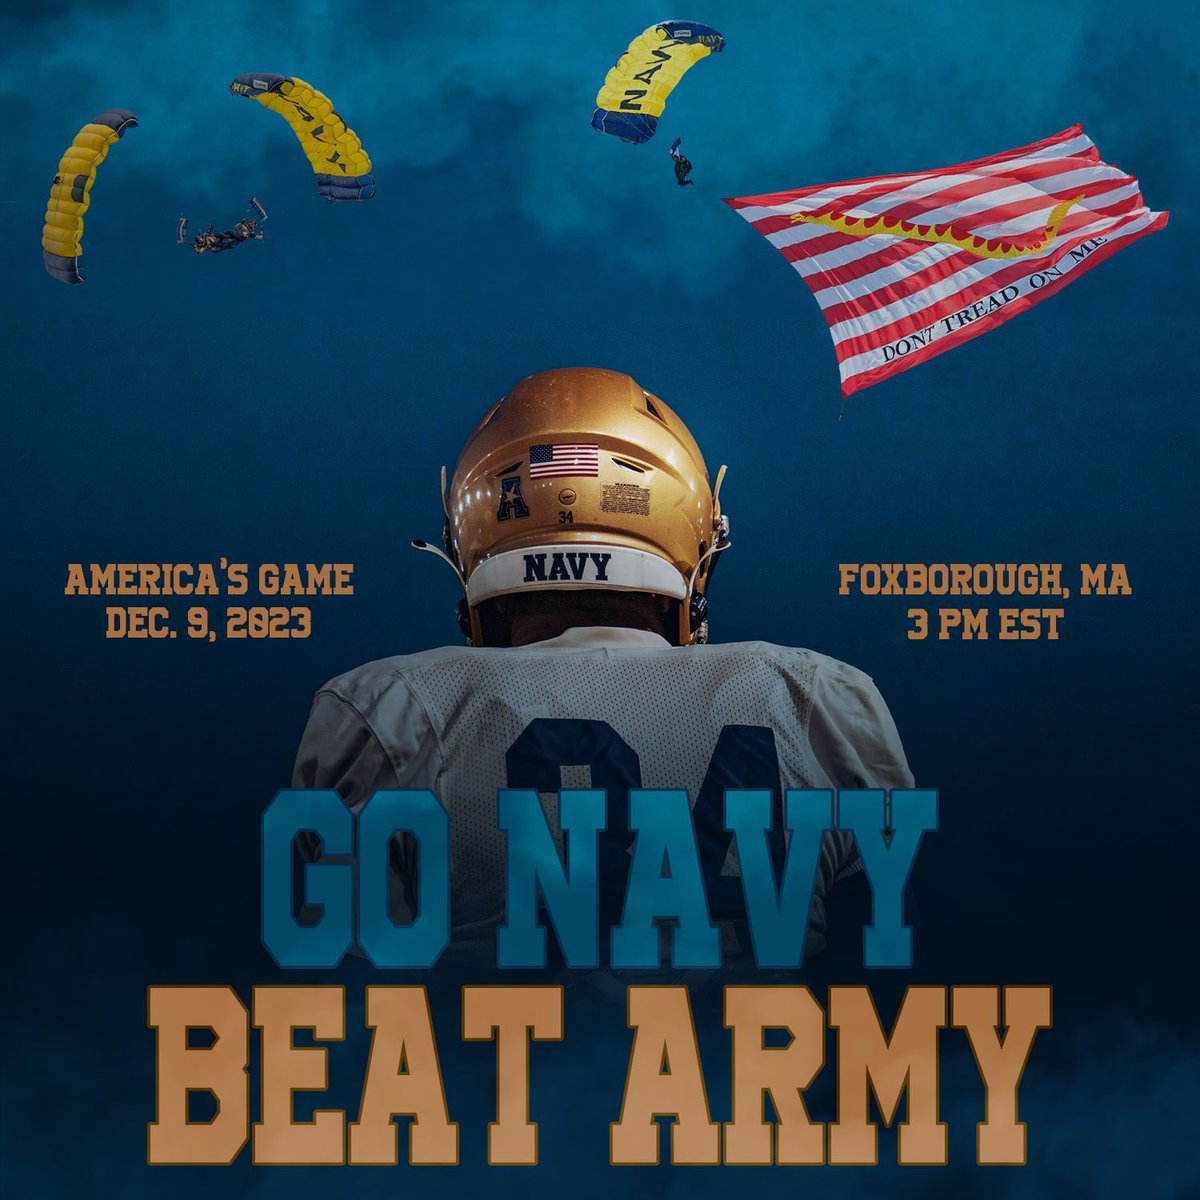 Counting down to the ultimate clash on the field🏈 Excited to be part of the aerial salute as the Navy Parachute Team drops into #Americasgame. ⚓️🪂 #ArmyNavy #GoNavyBeatArmy #LeapFrogs